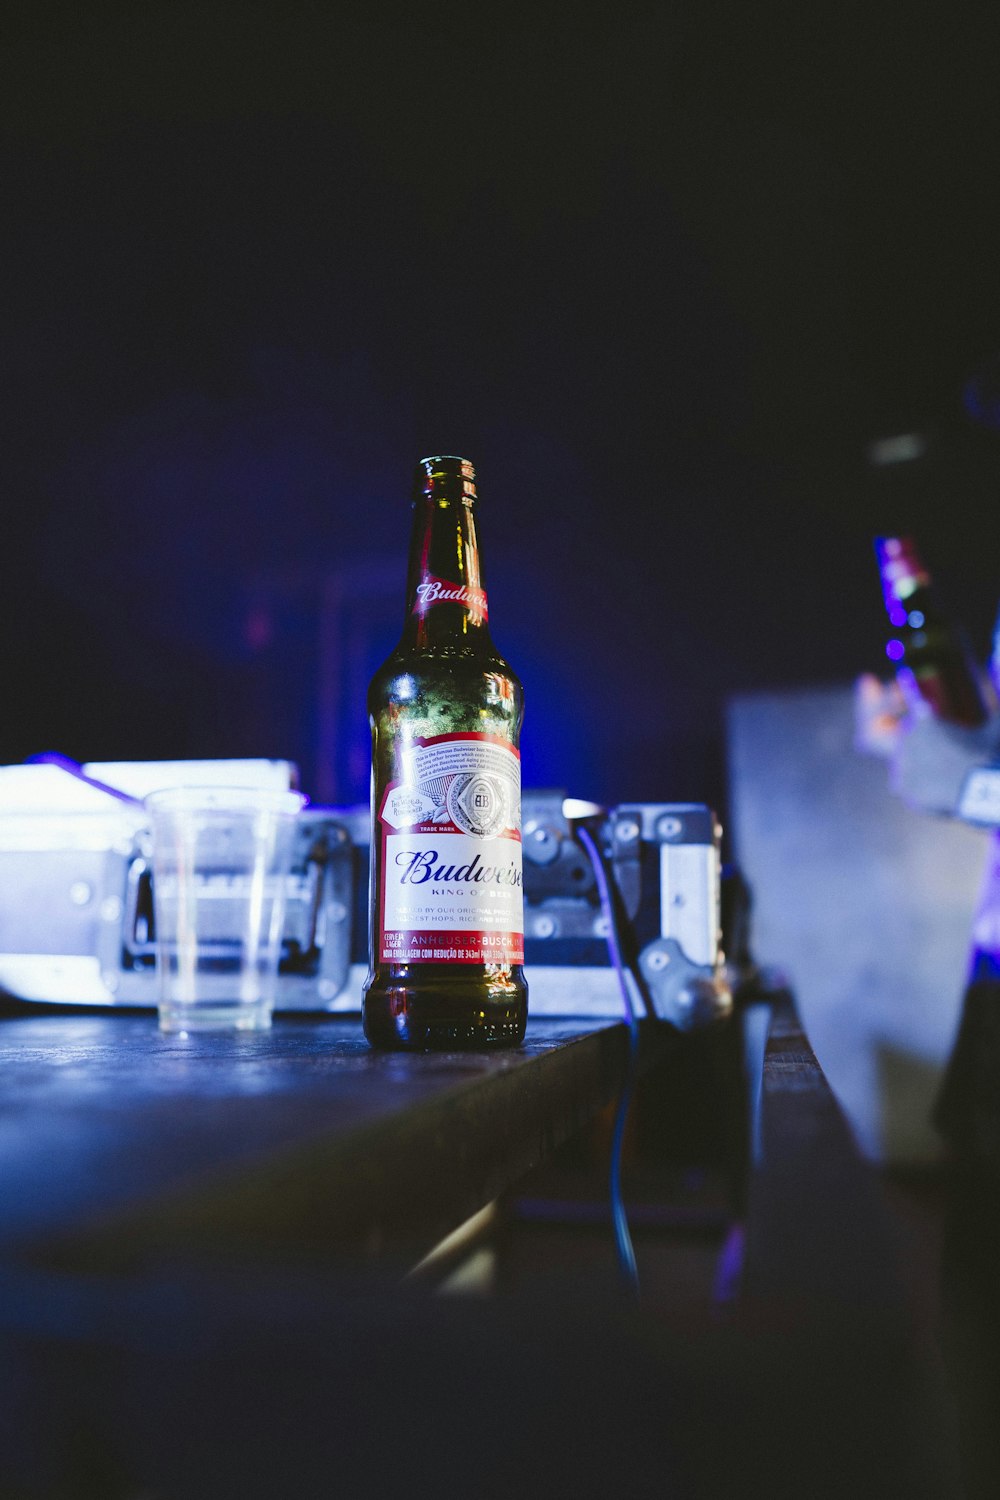 Budweiser bottle on brown wooden table